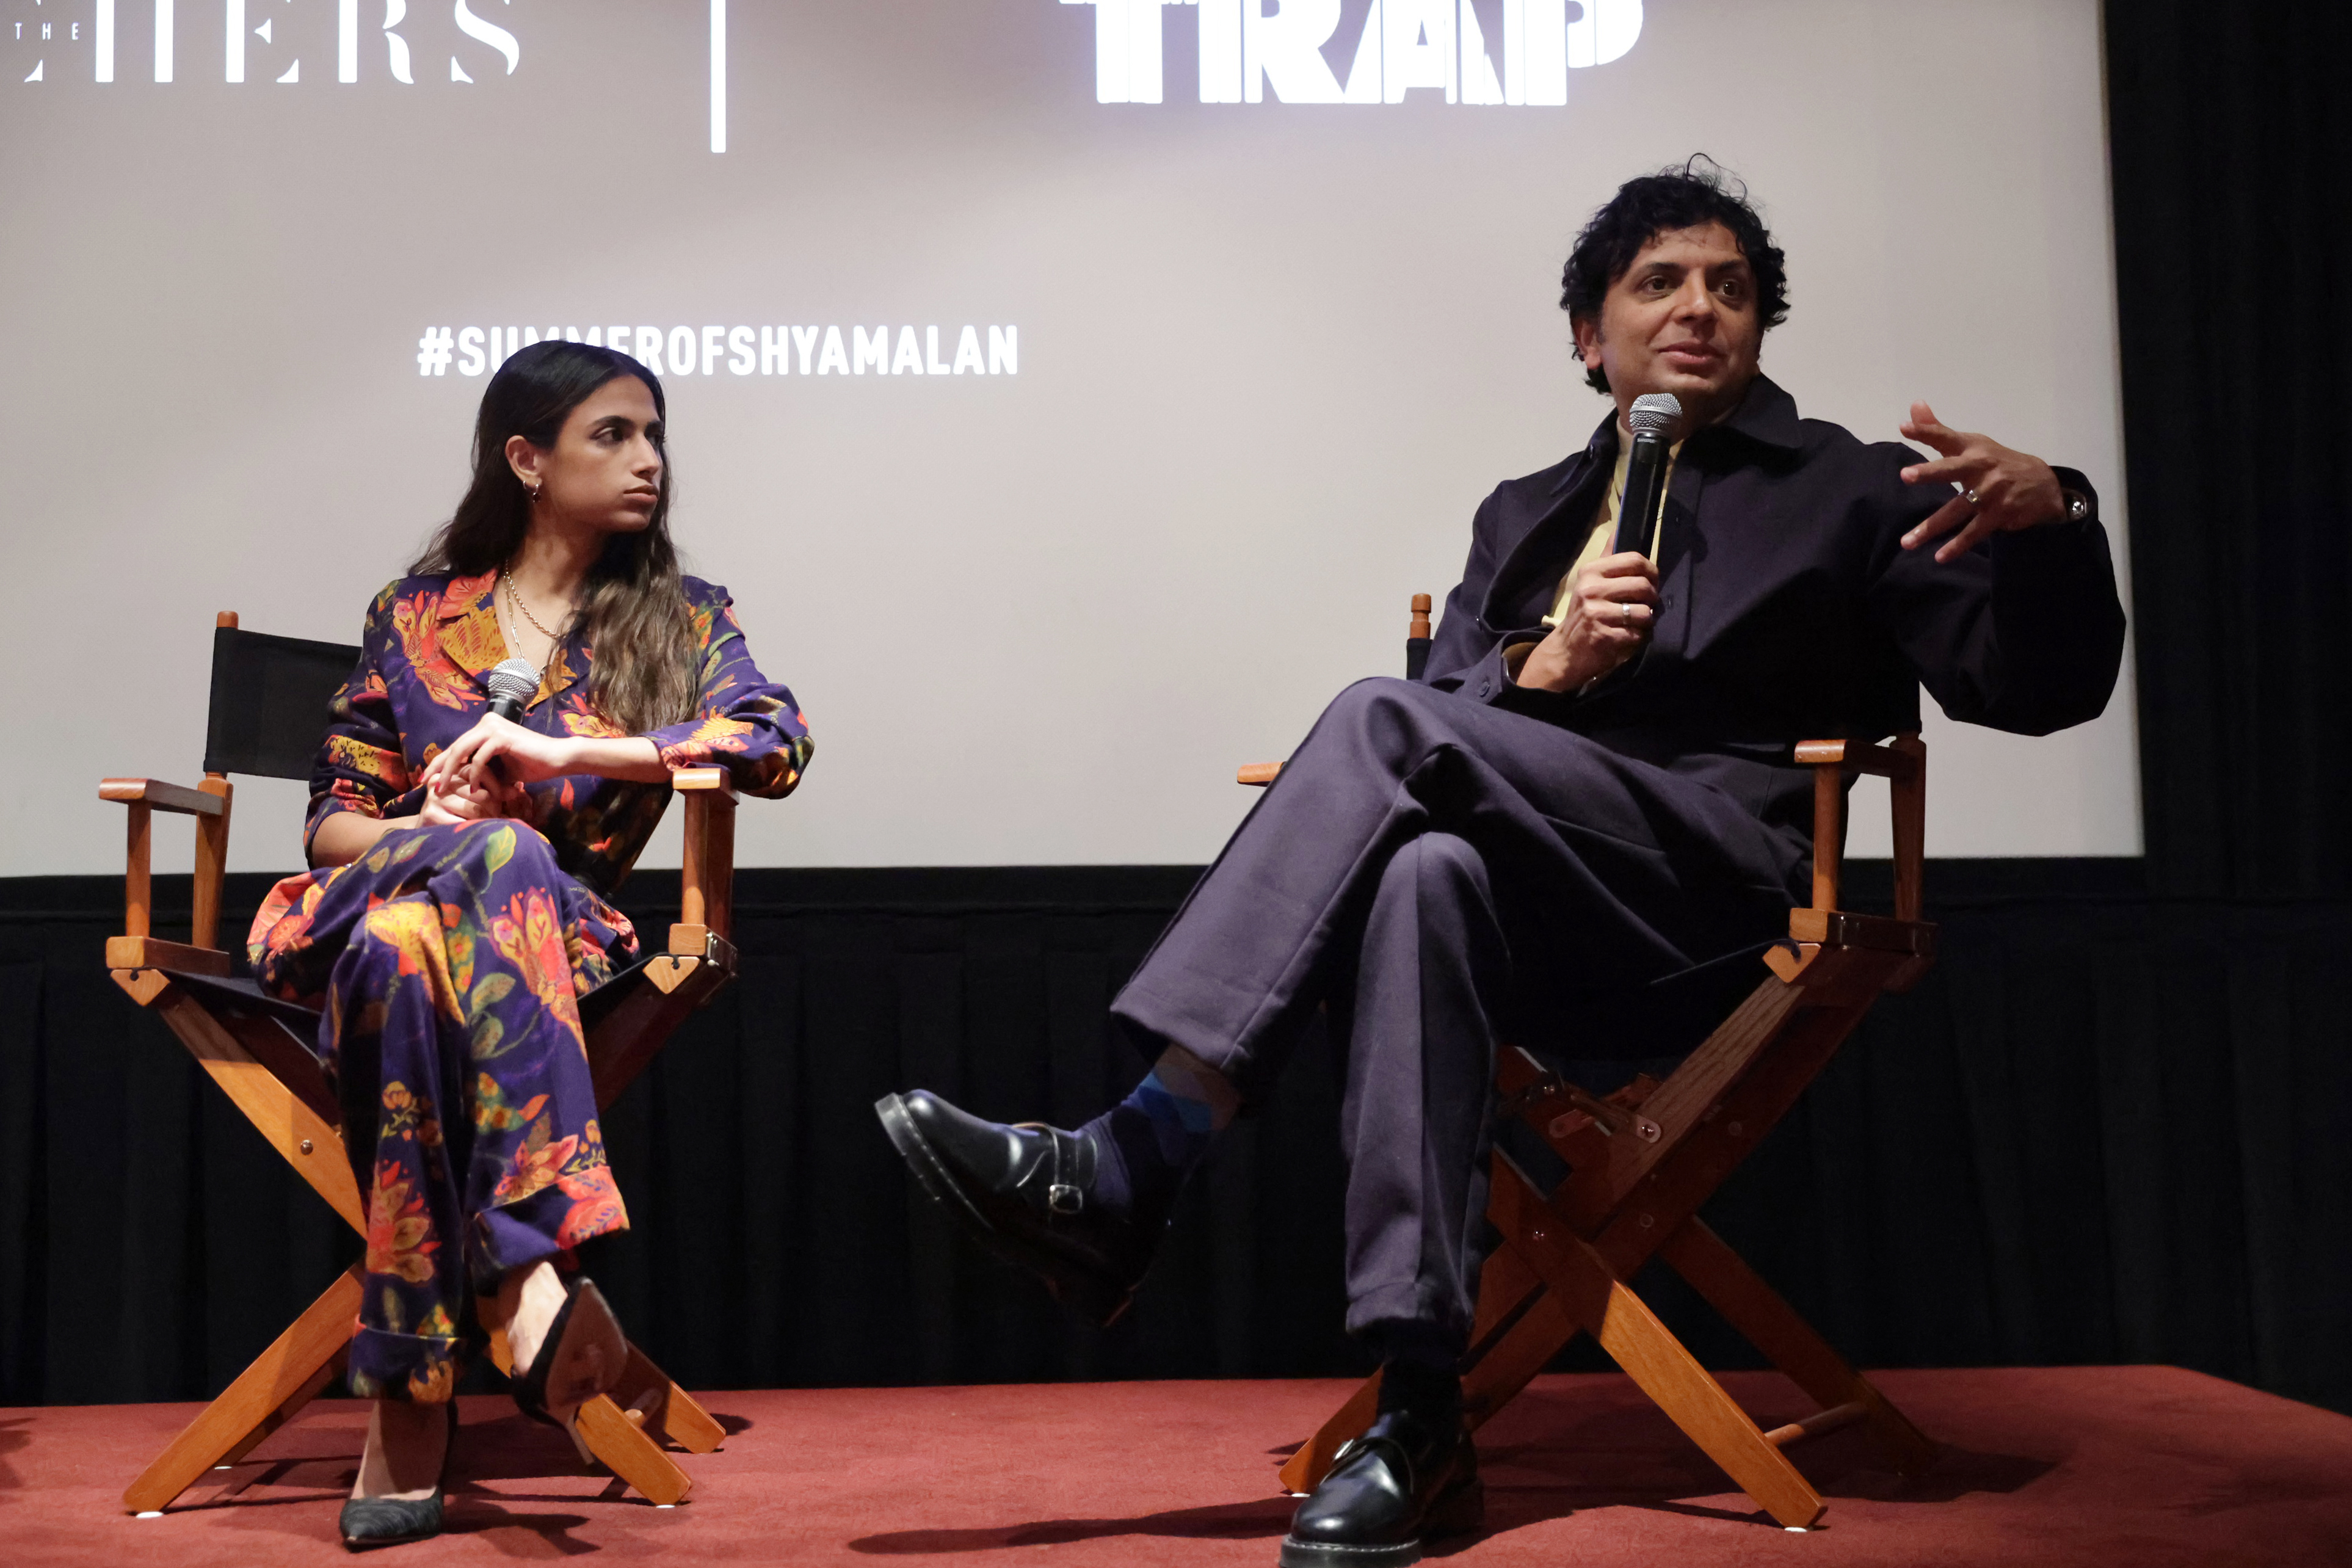 Director M. Night Shyamalan Talks ‘Trap’ Trailer, Telling a Story With Music & More